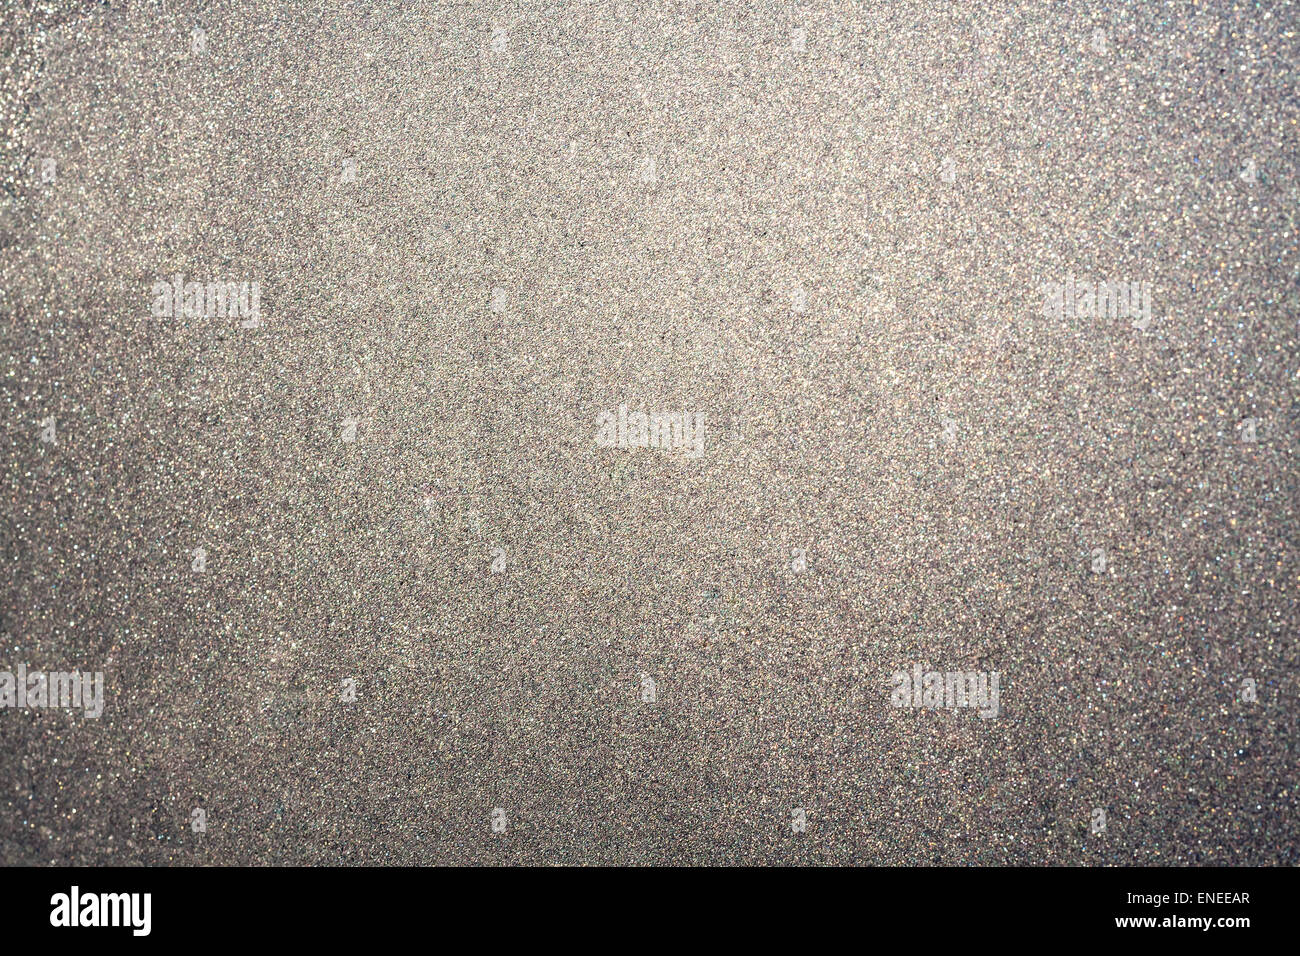 Abstract glittering silver or gray dust or sand background with blur edges of image Stock Photo